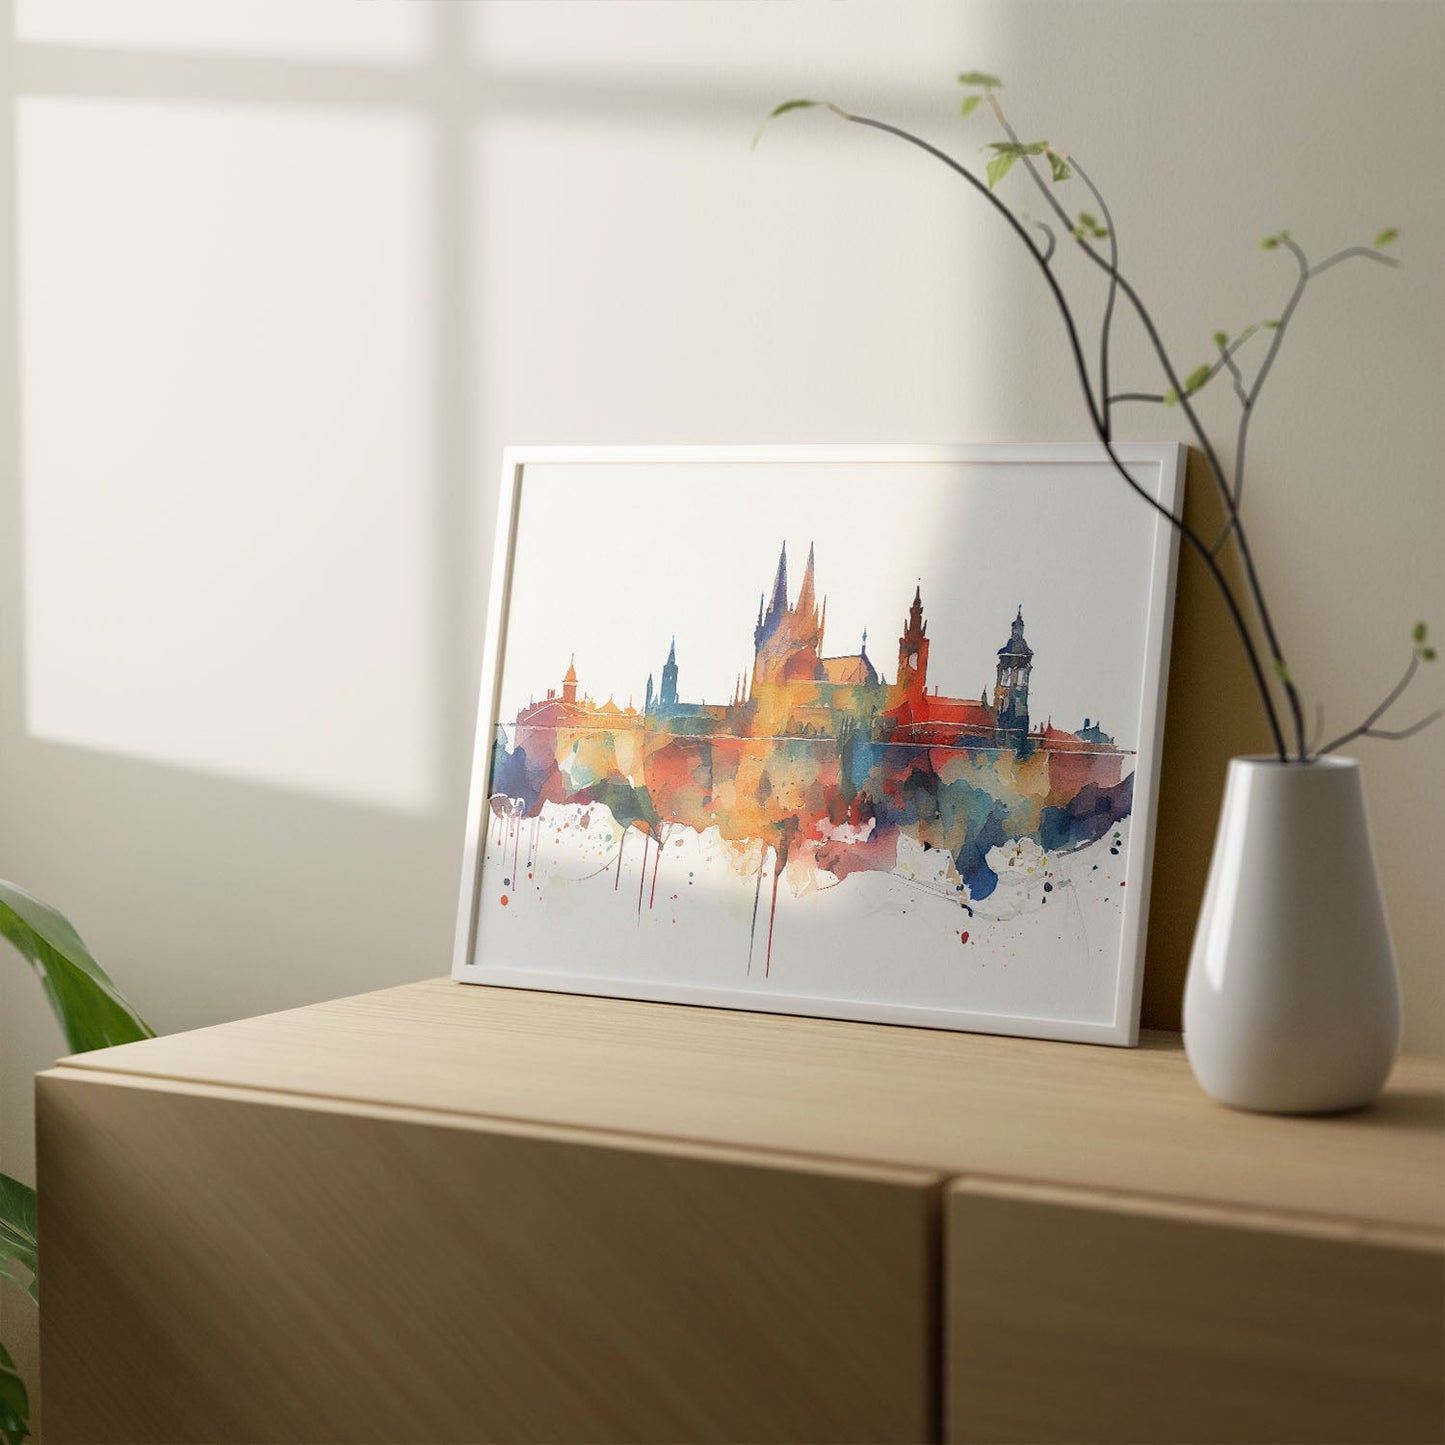 Nacnic watercolor of a skyline of the city of Prague_4. Aesthetic Wall Art Prints for Bedroom or Living Room Design.